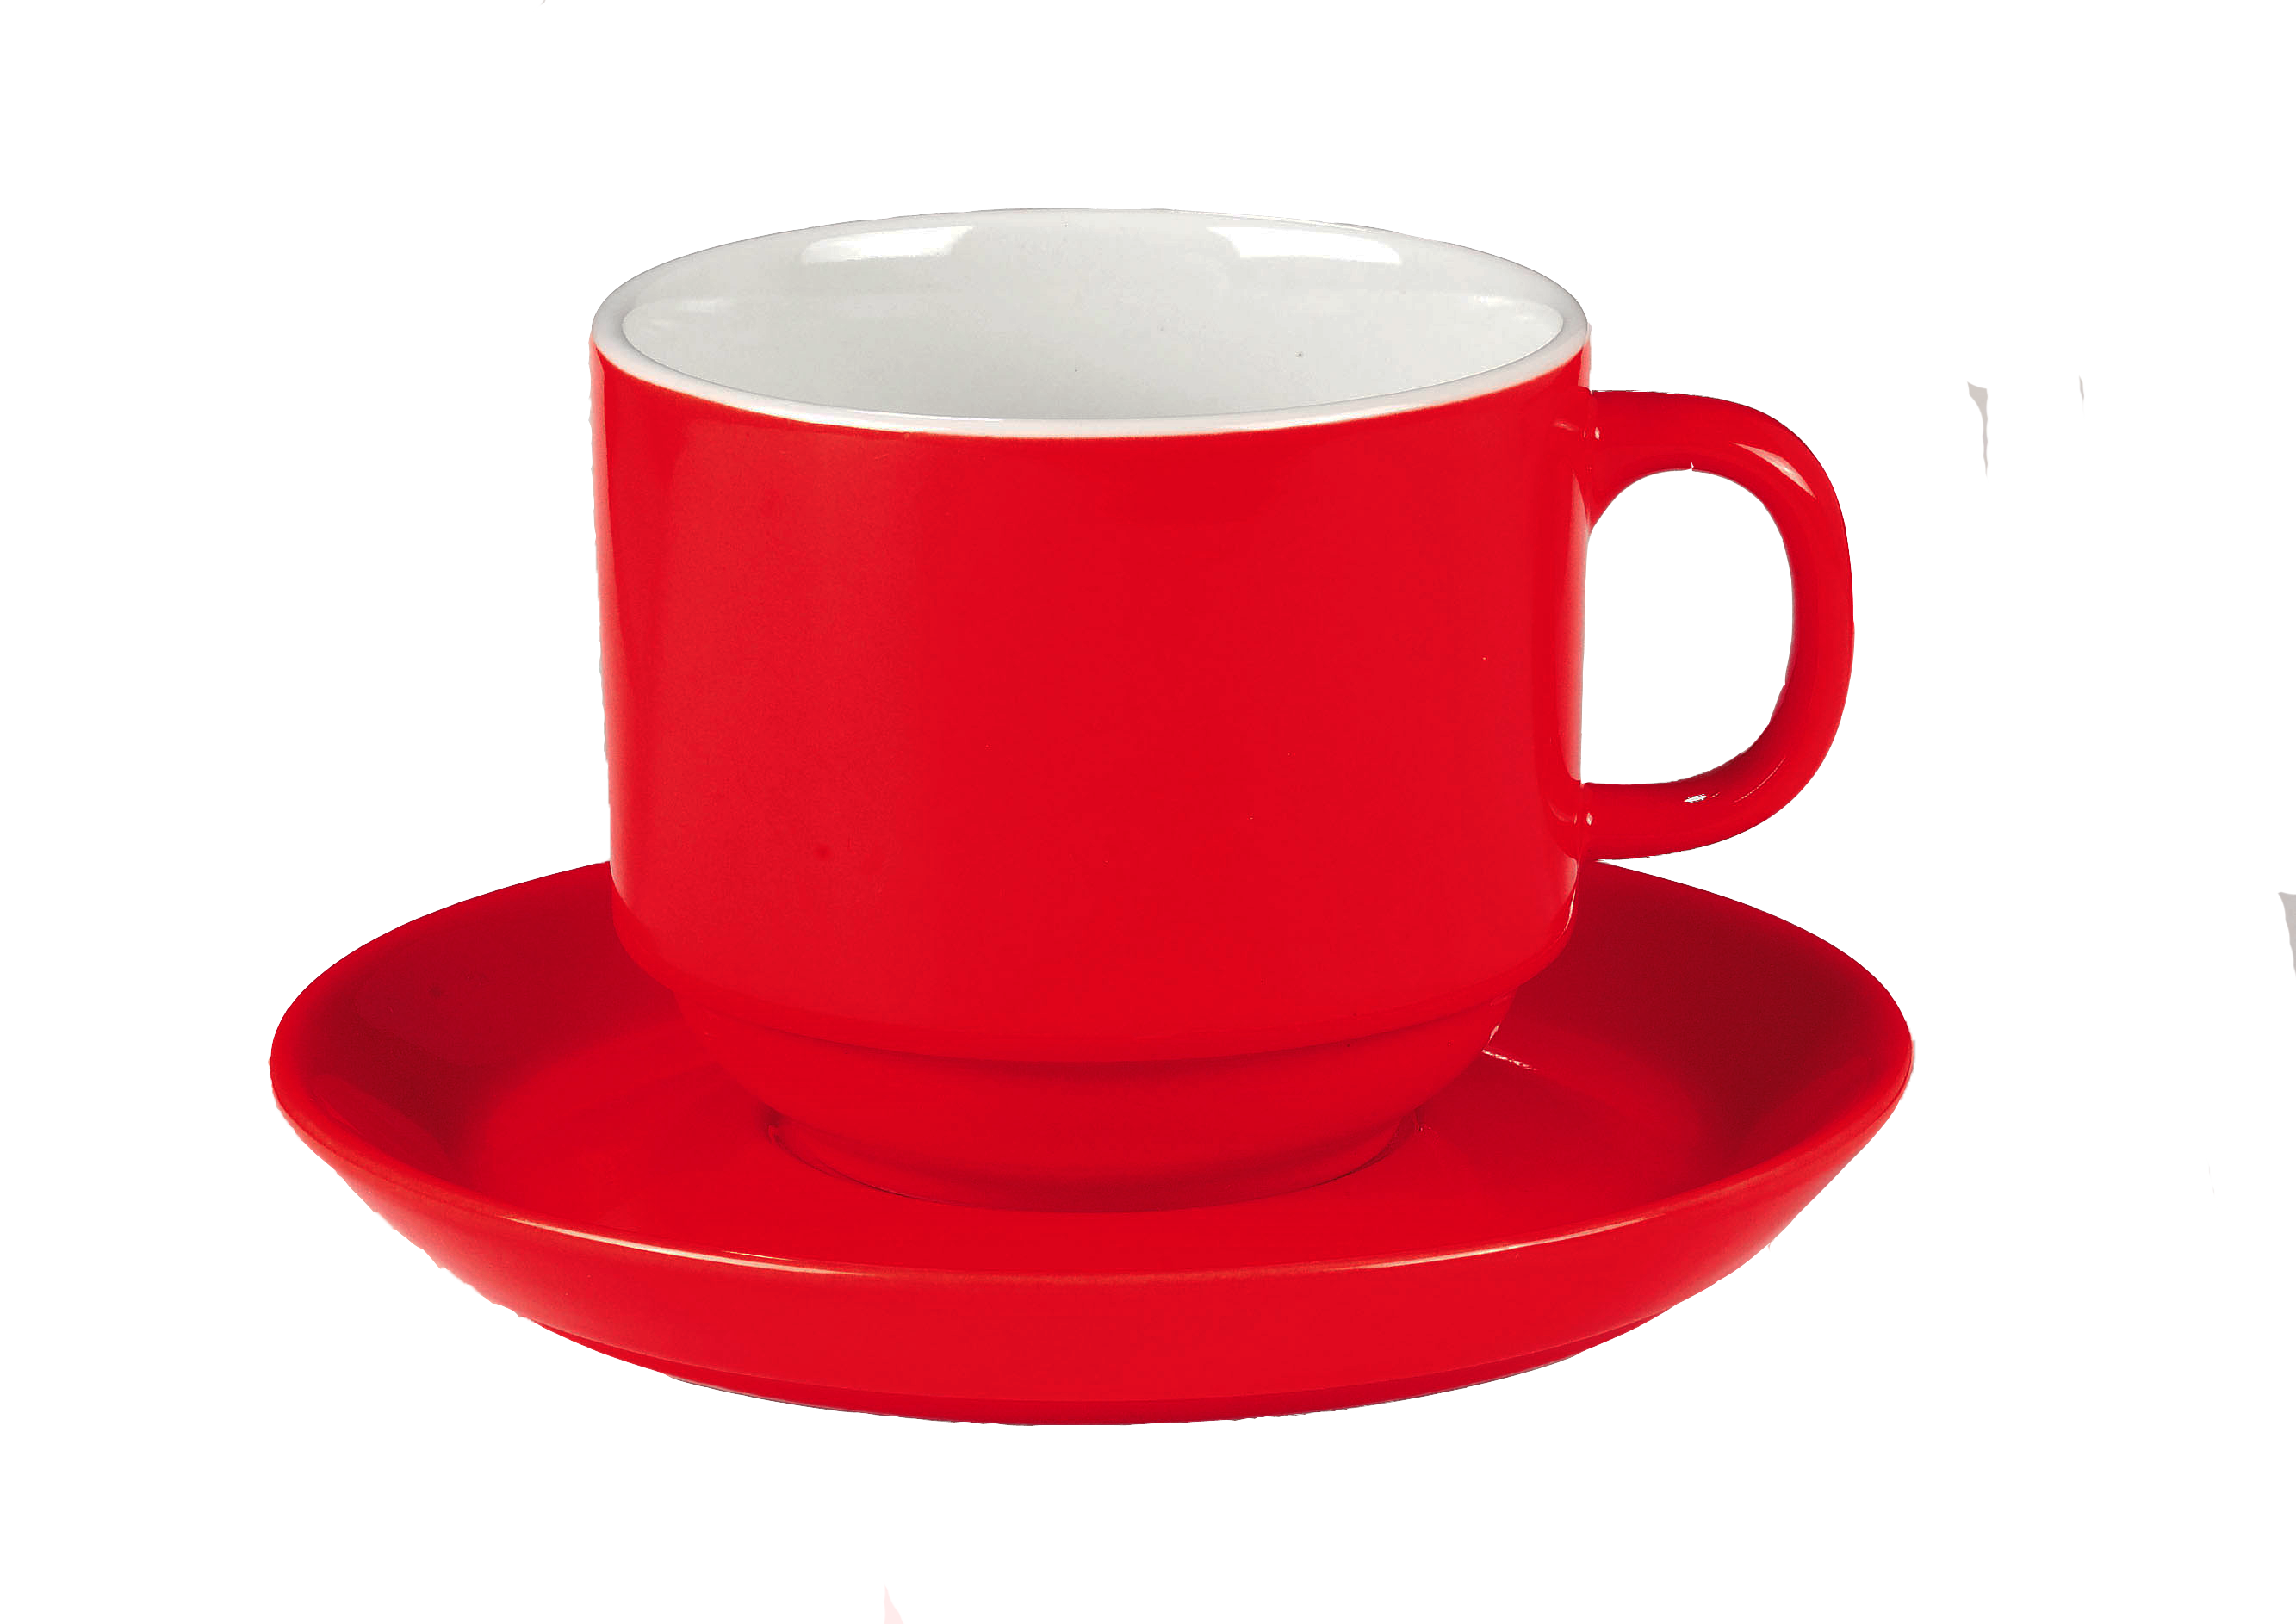 Red Cup Png Image - Cup, Transparent background PNG HD thumbnail